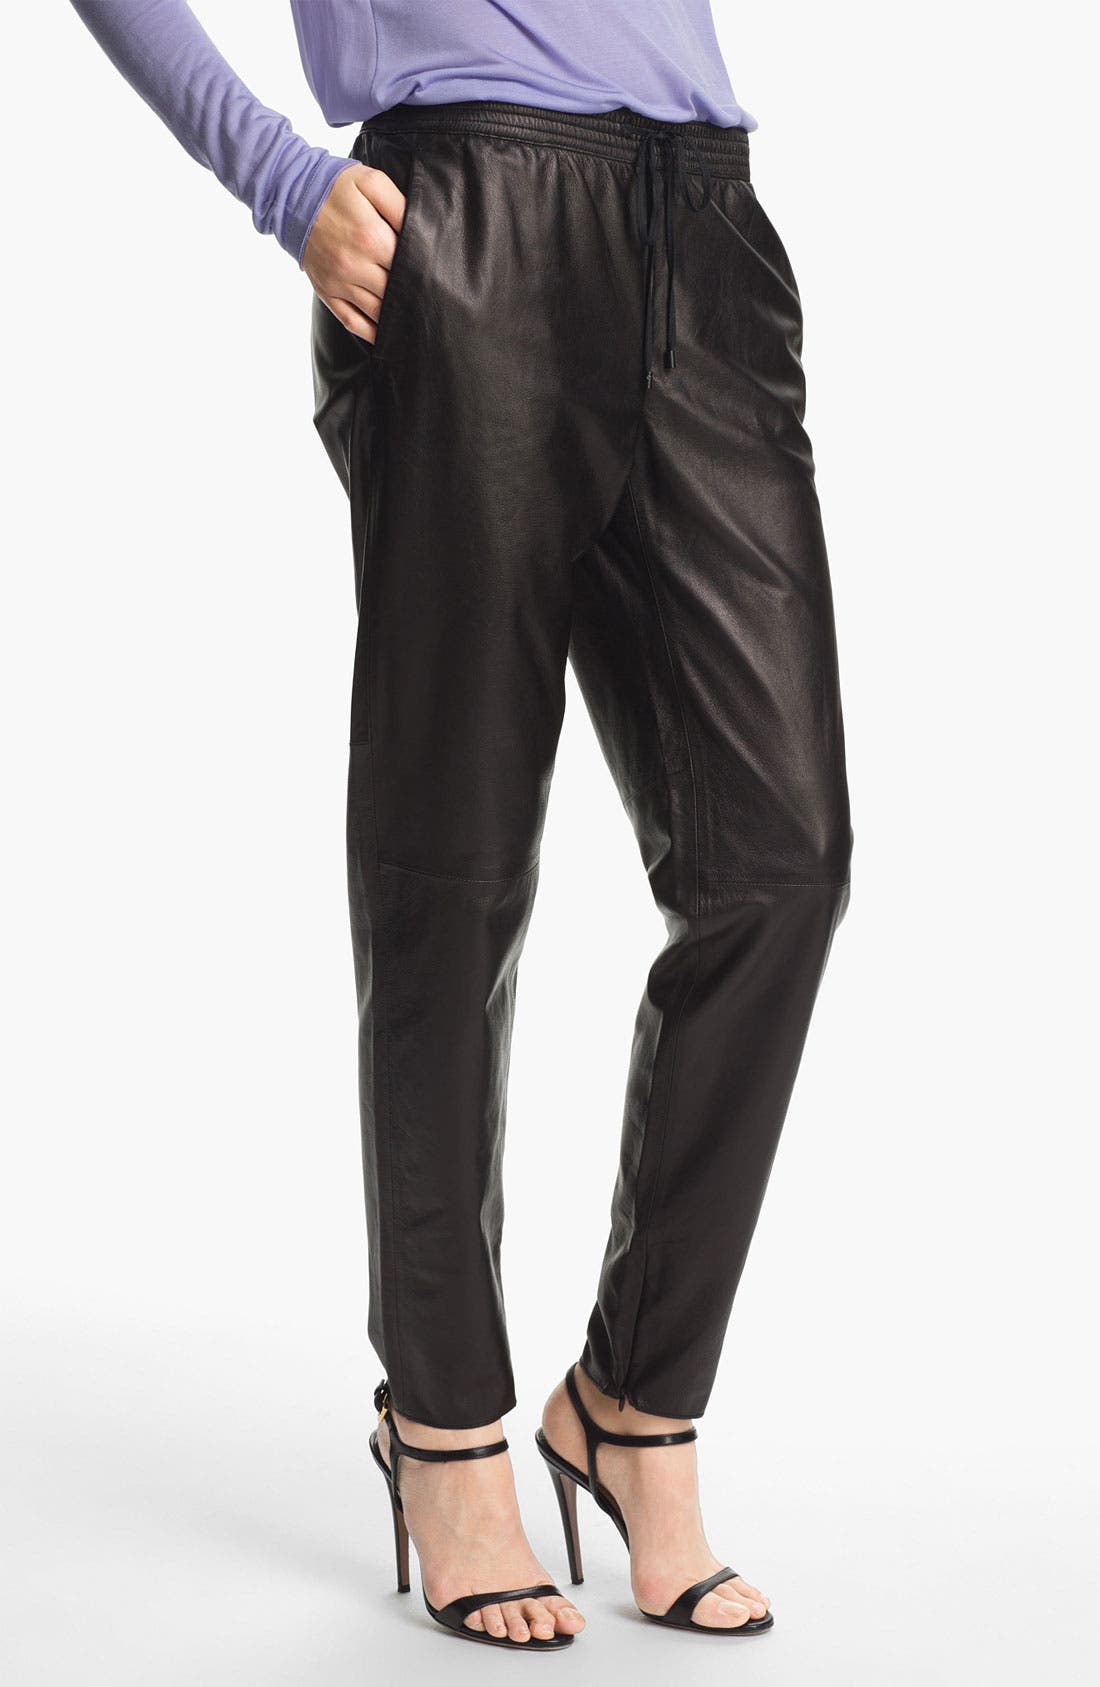 nordstrom leather pants